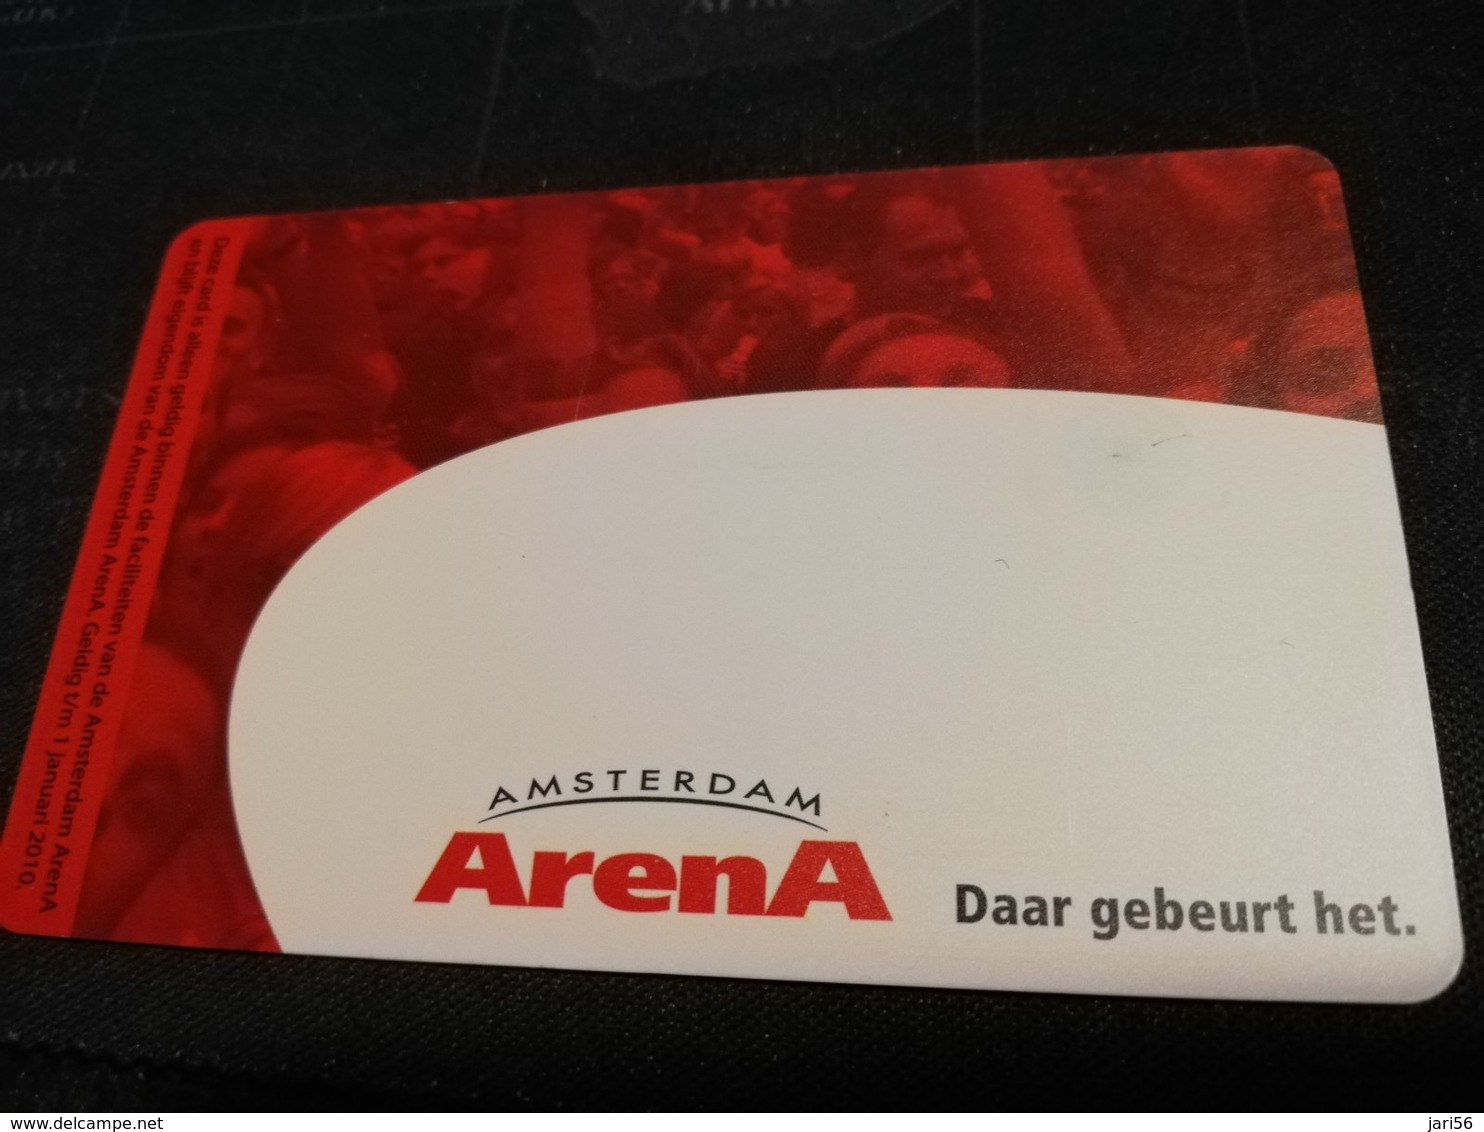 NETHERLANDS  ARENA CARD  BRUCE SPRINGSTEEN   €20,- USED CARD  ** 1426** - Pubbliche